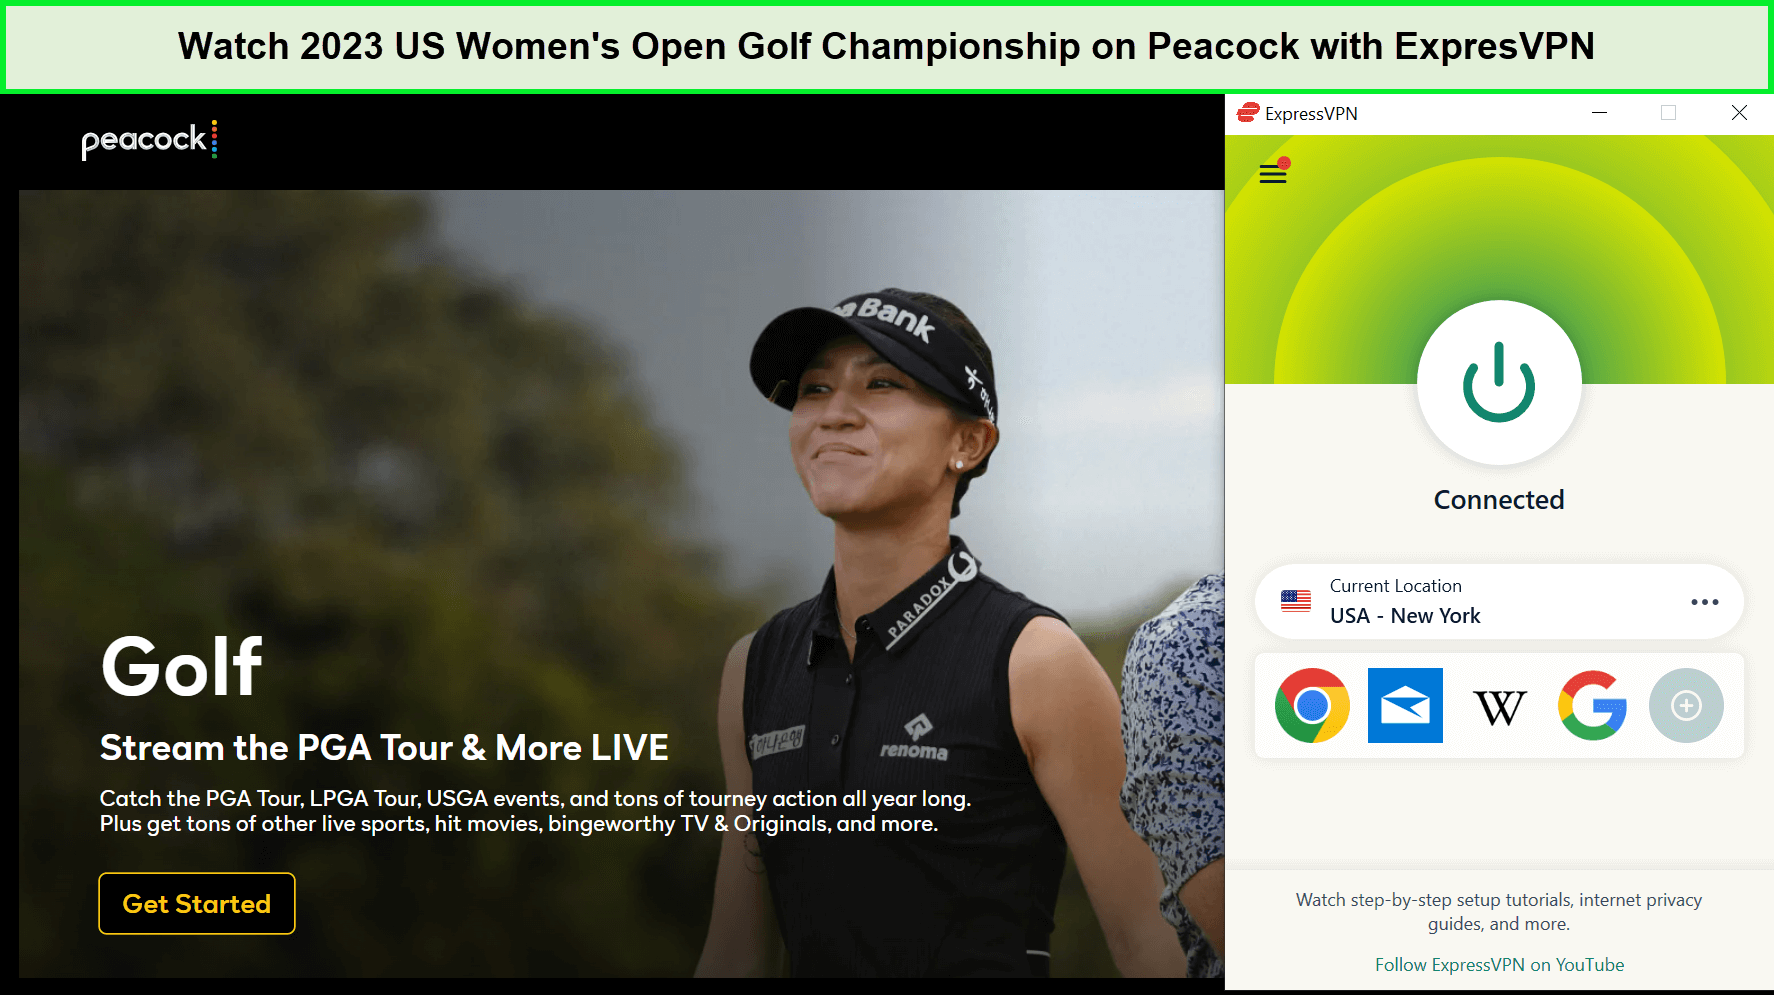 Watch-2023-US-Womens-Open-Golf-Championship-in-Spain-on-Peacock-with-ExpresVPN